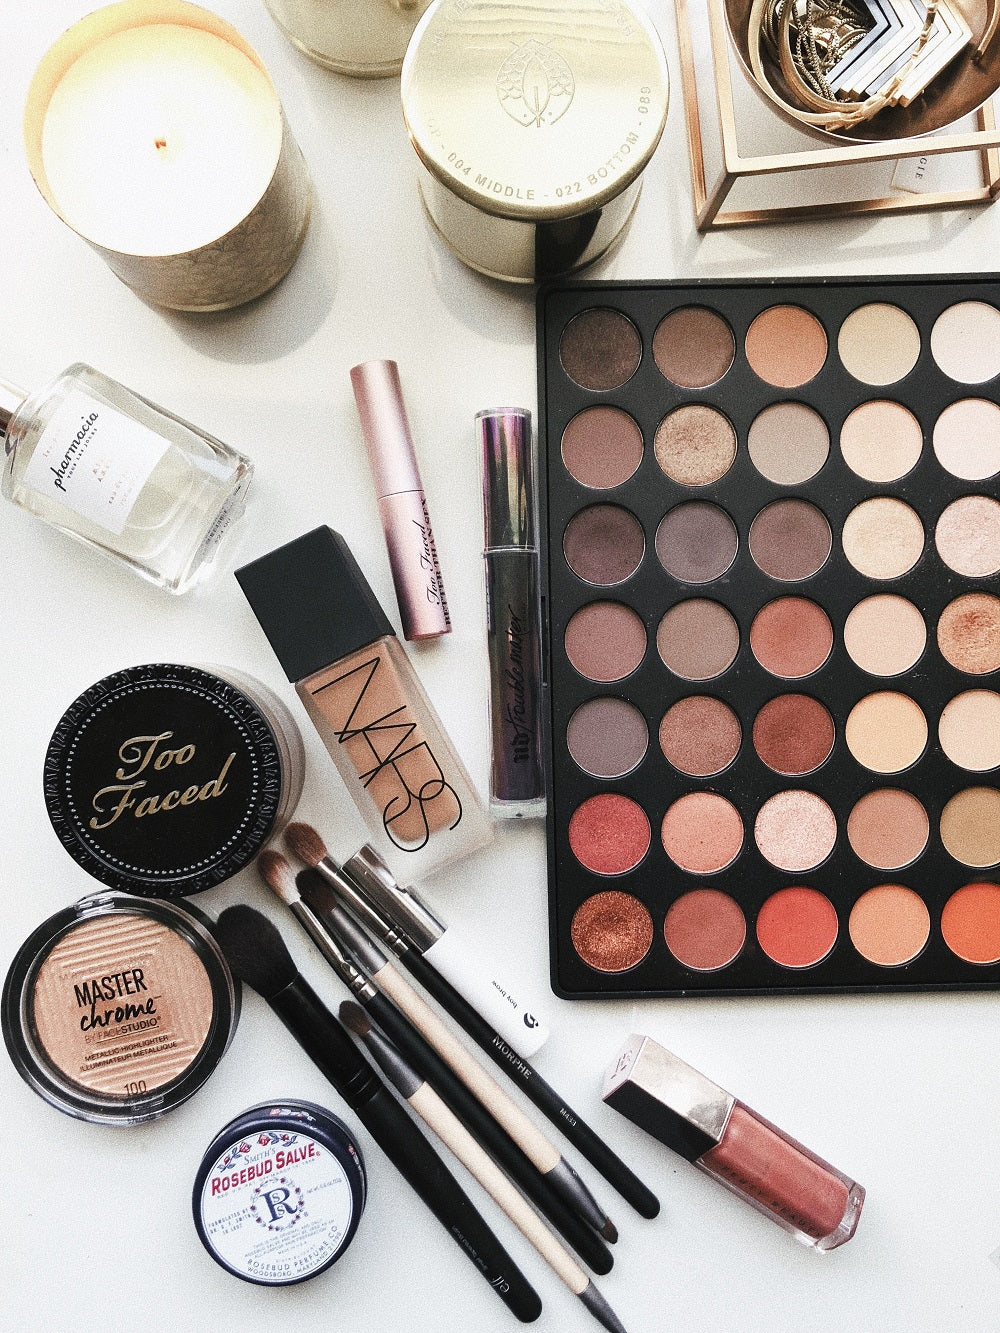 How to Save Money on Makeup – 10 Tips You Need To Know